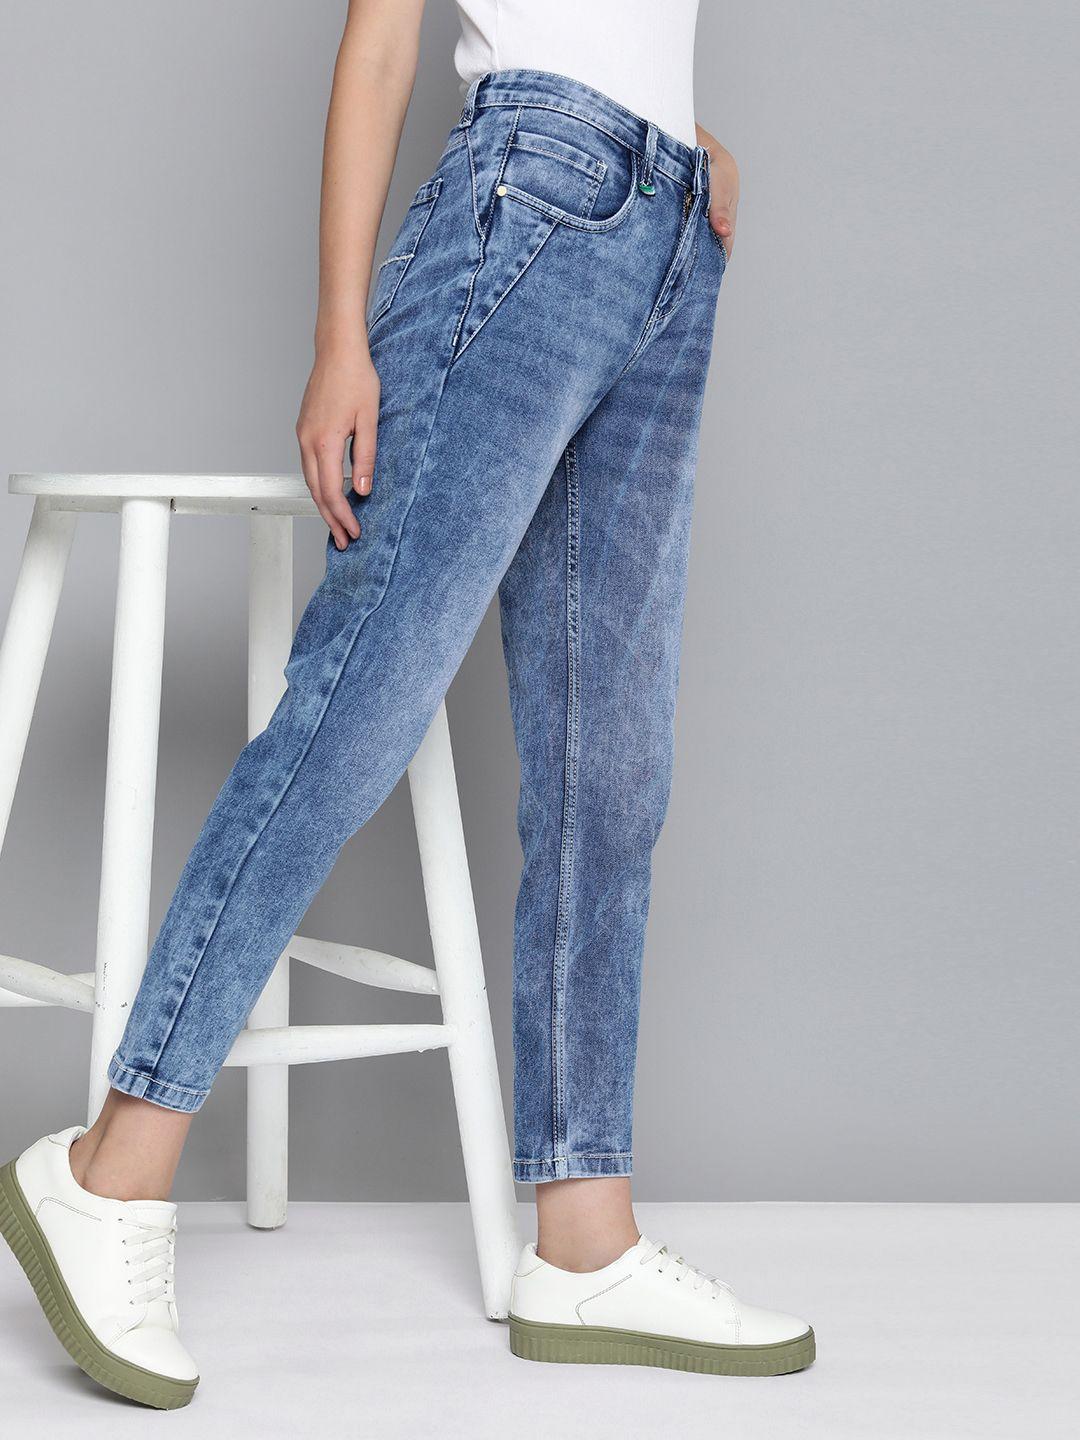 mast-&-harbour-women-heavy-fade-stretchable-mid-rise-jeans